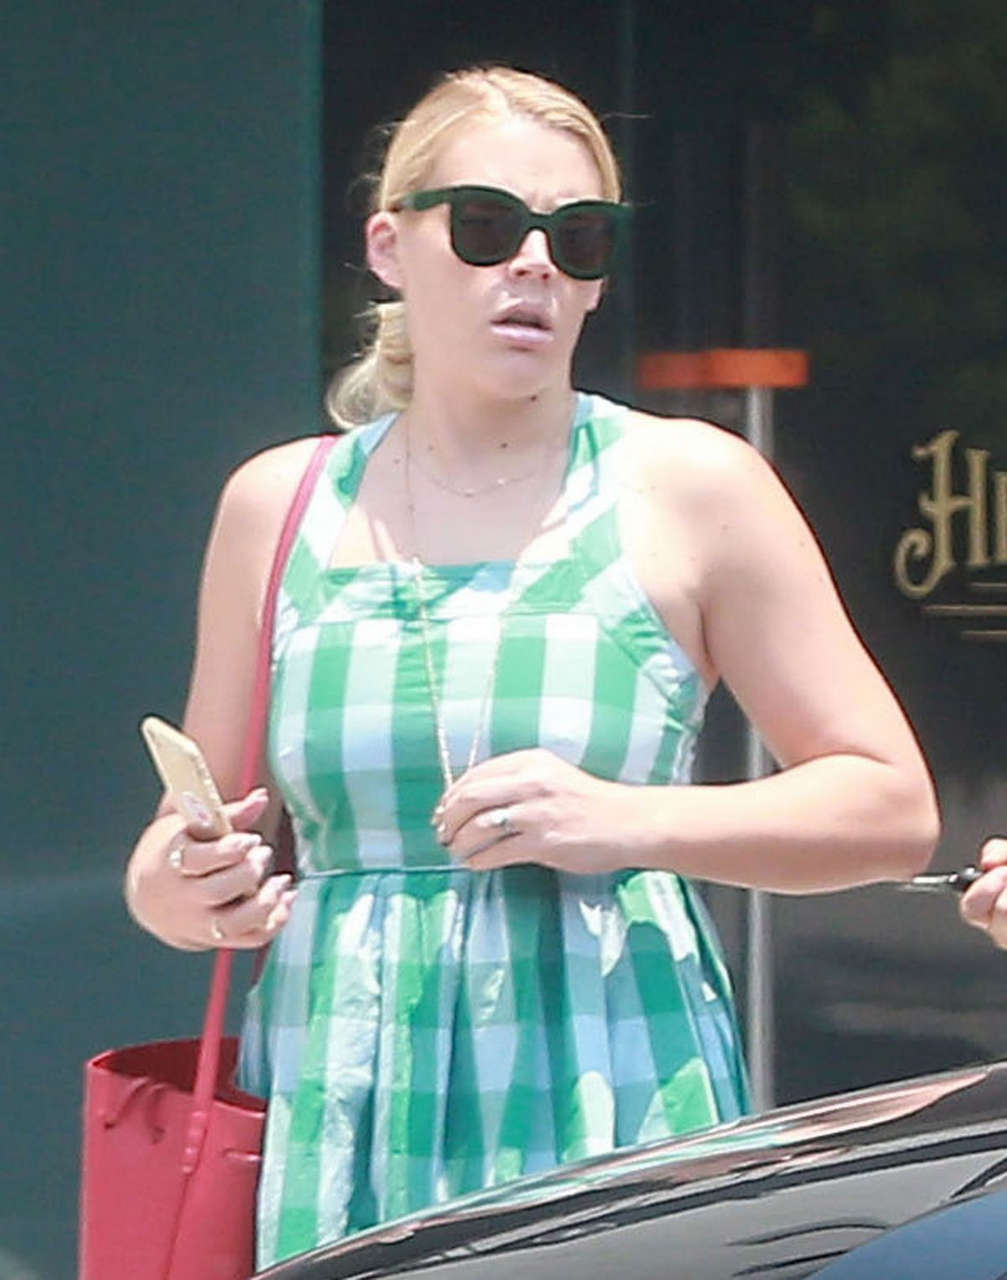 Busy Philippes Out About West Hollywood